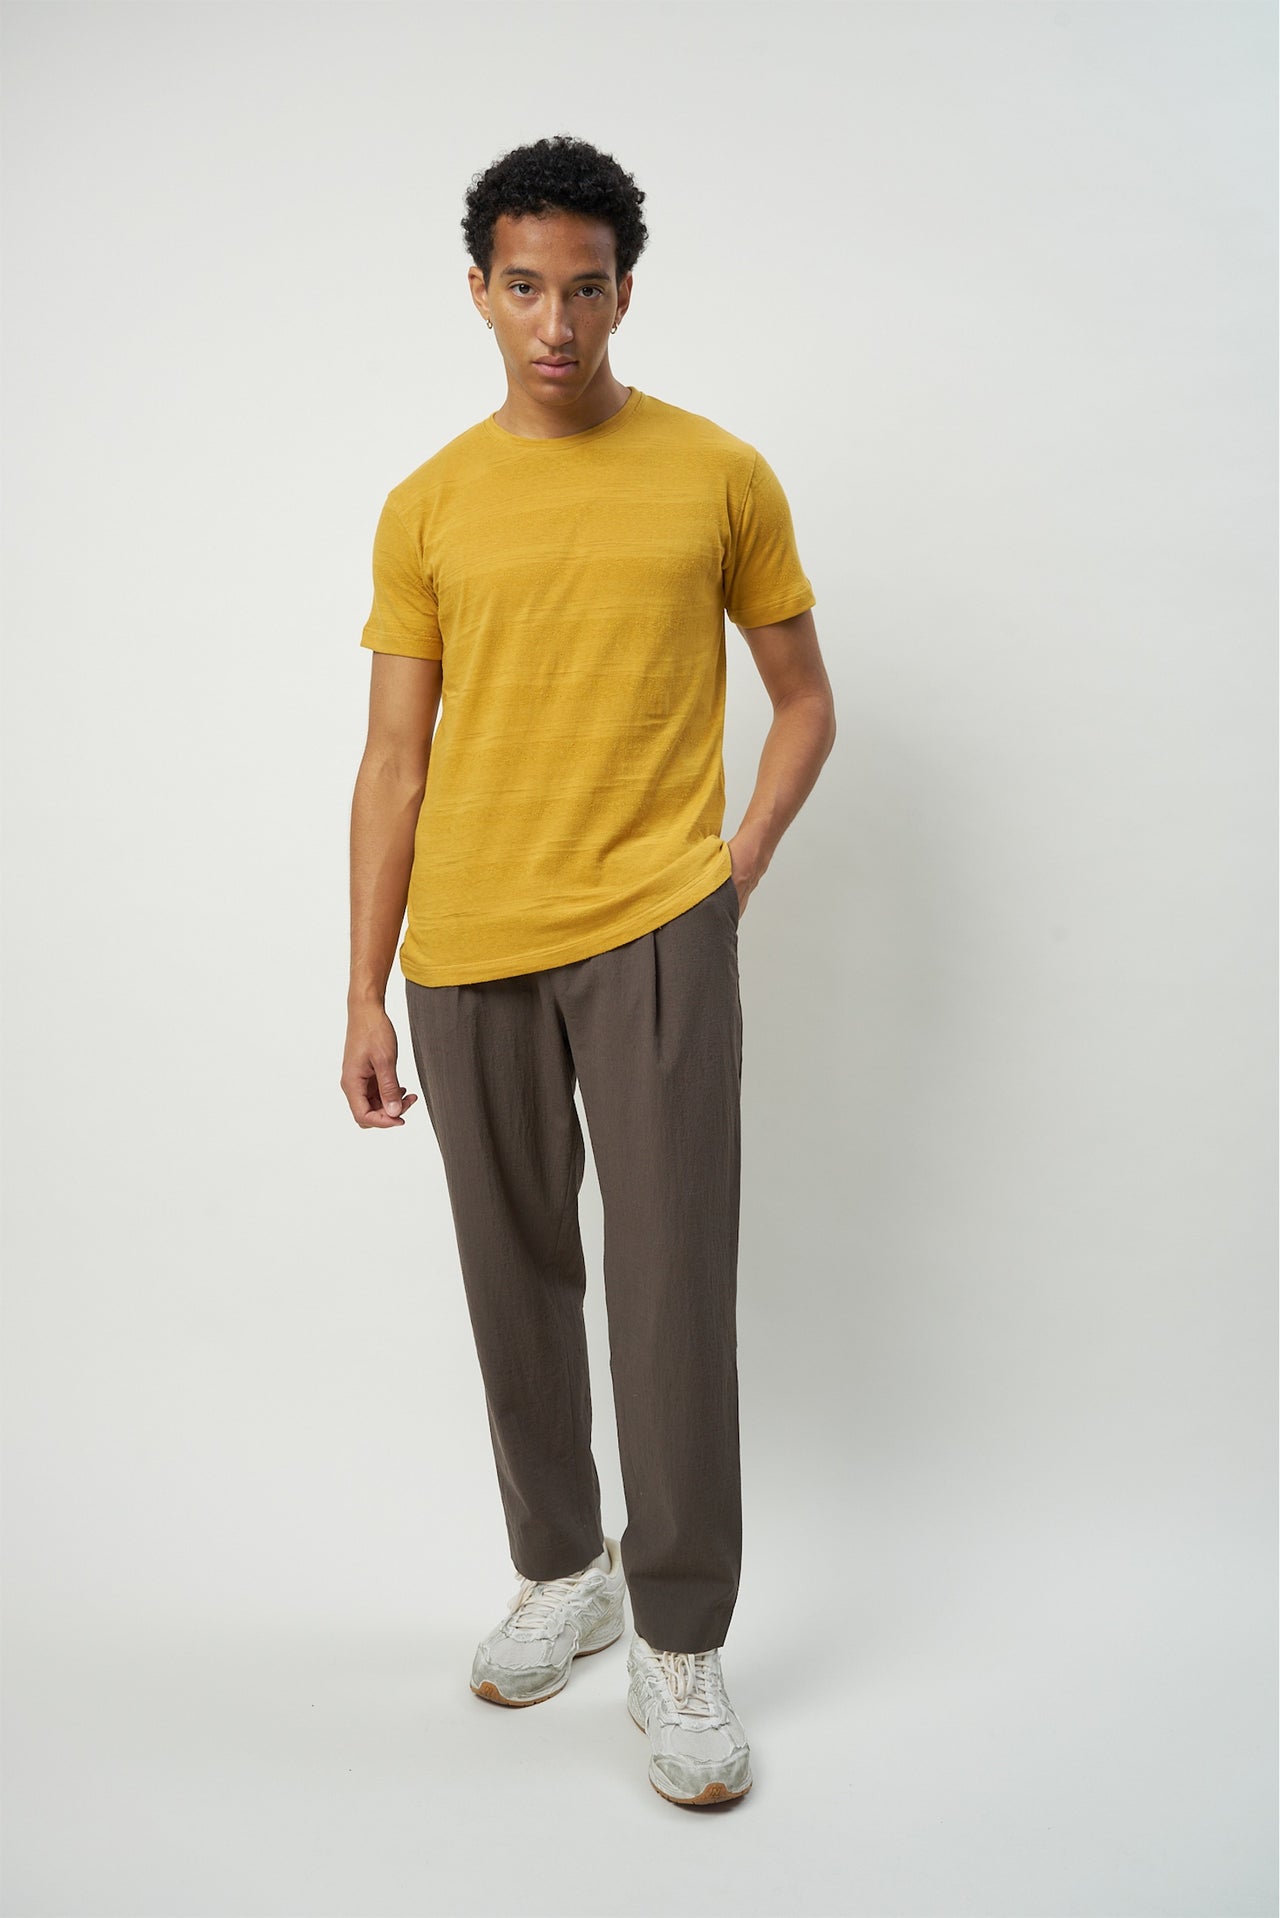 T-Shirt in a Yellow Japanese Slow-Knit Cotton Jersey